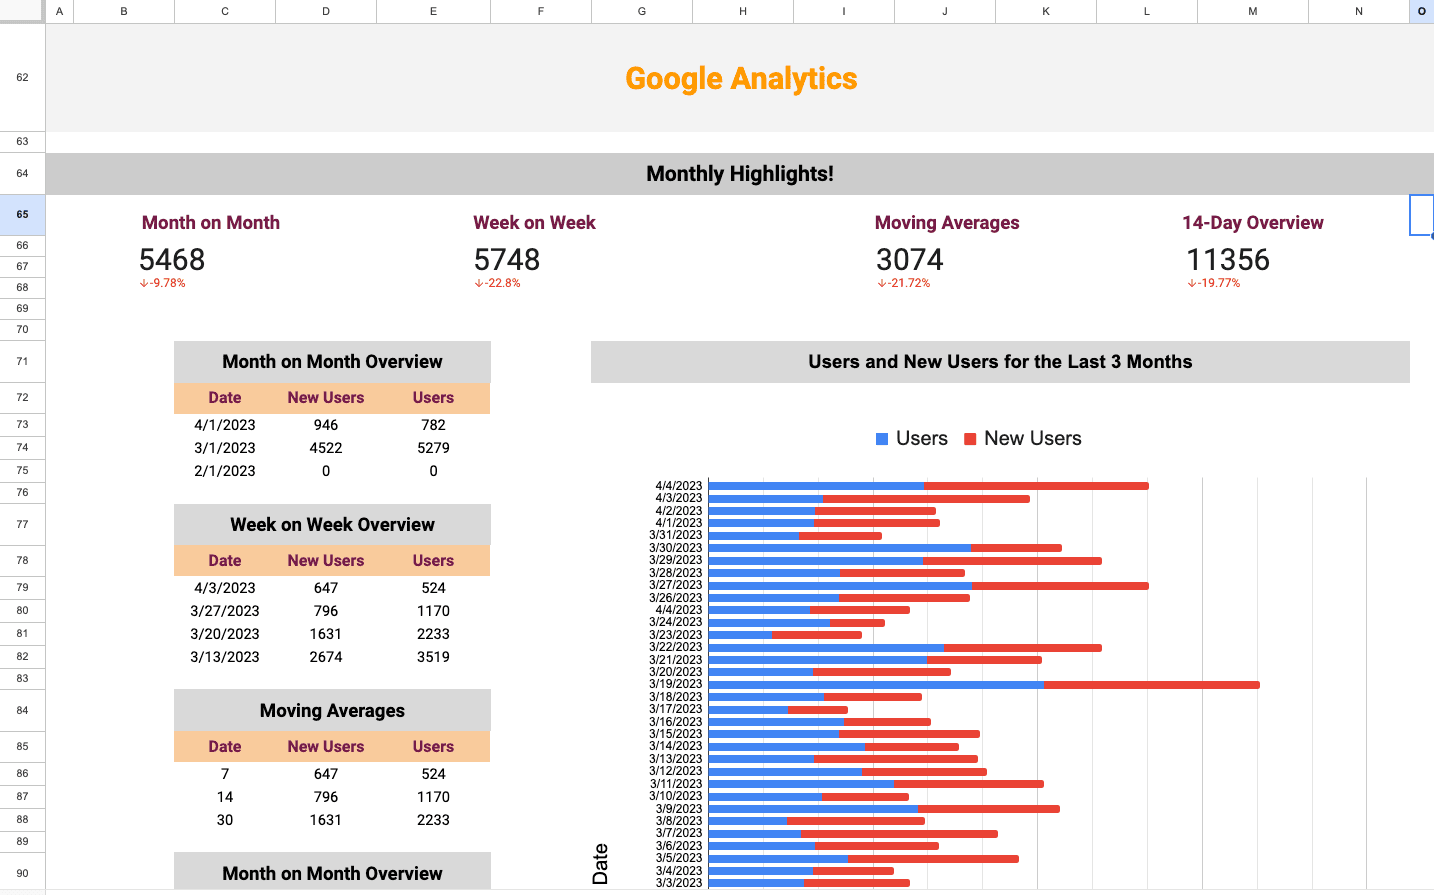 Facebook Ads, Google Ads & analytics - complete side-by-side Analysis